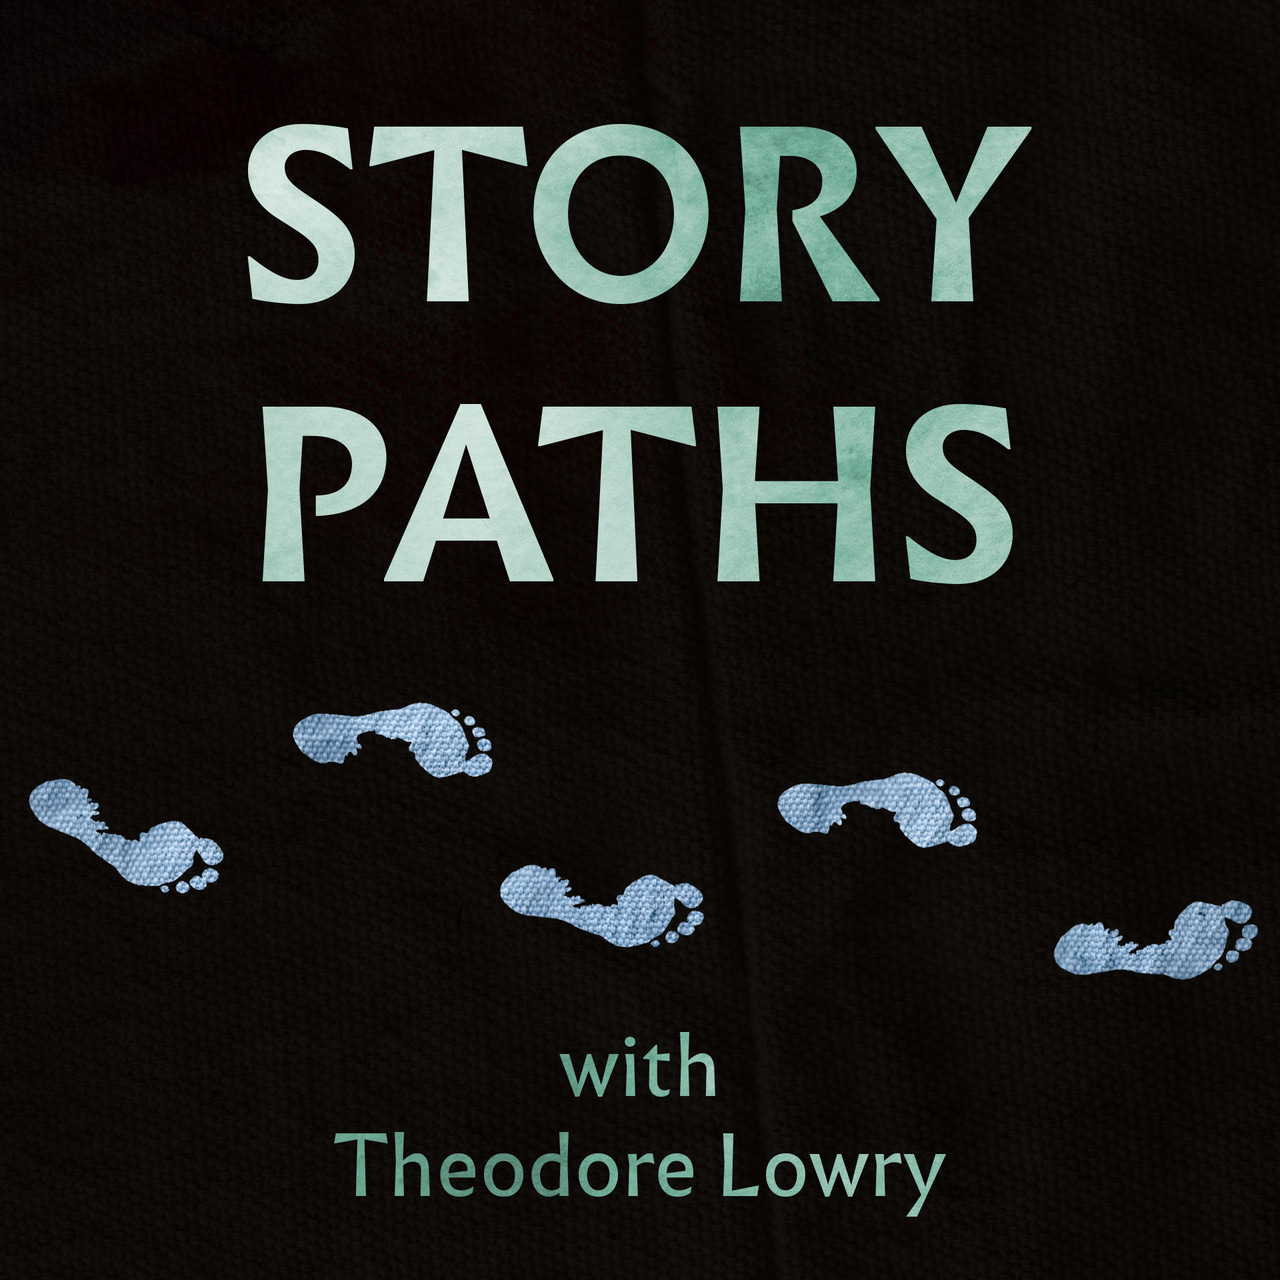 Story Paths